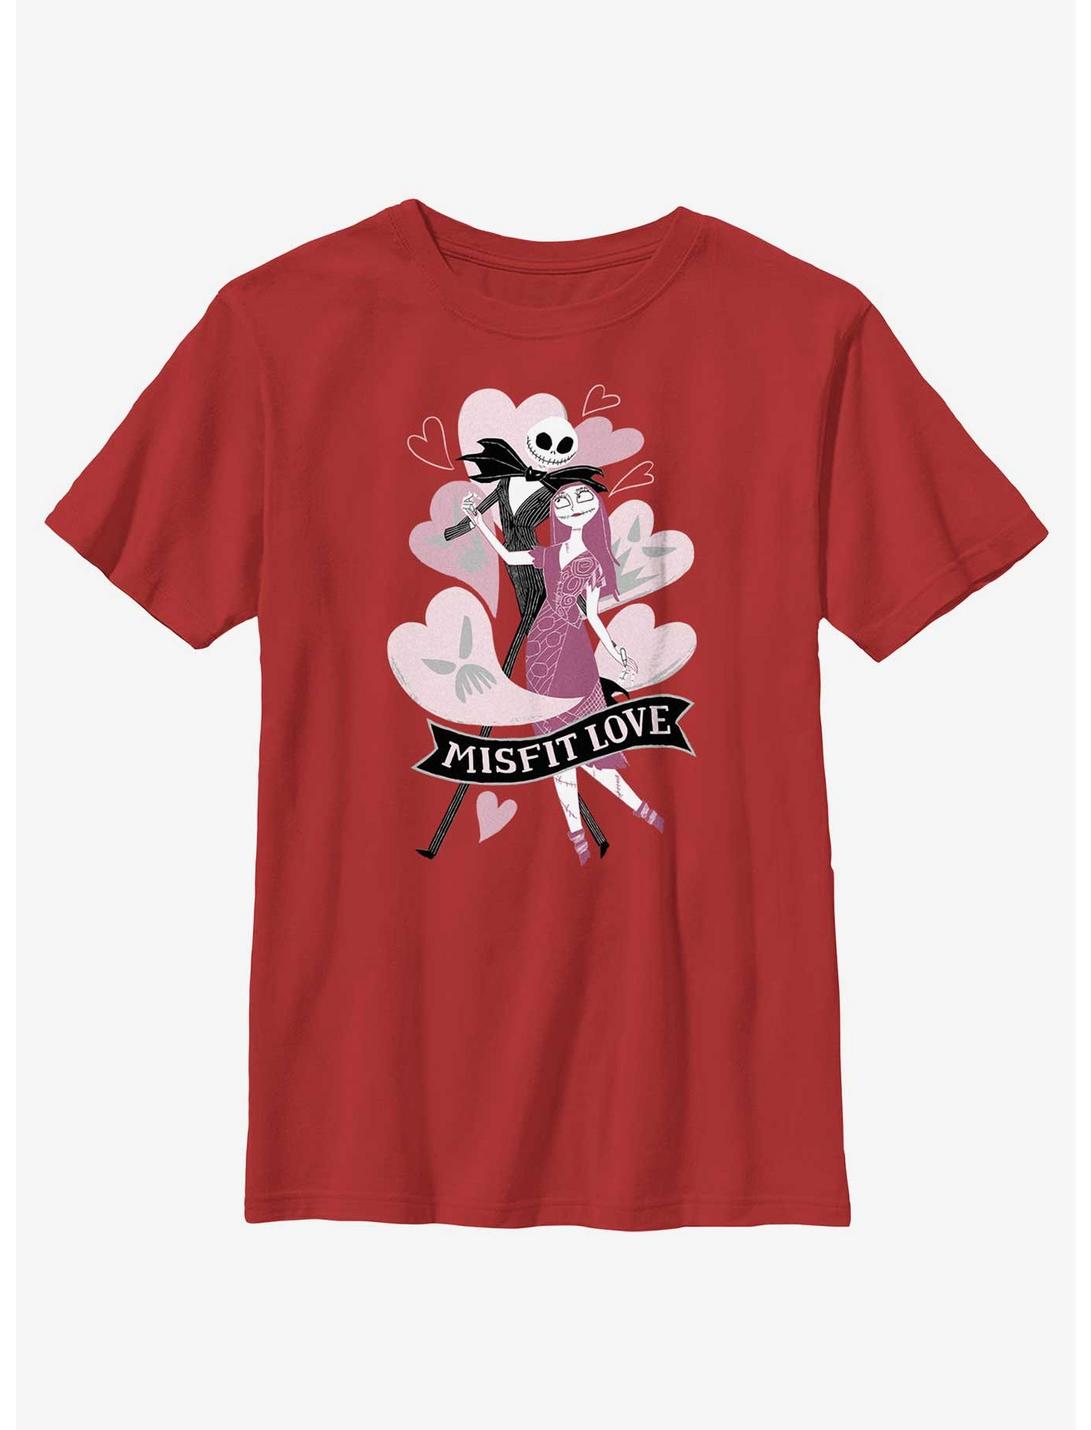 Disney Nightmare Before Christmas Misfit Love Youth T-Shirt, RED, hi-res